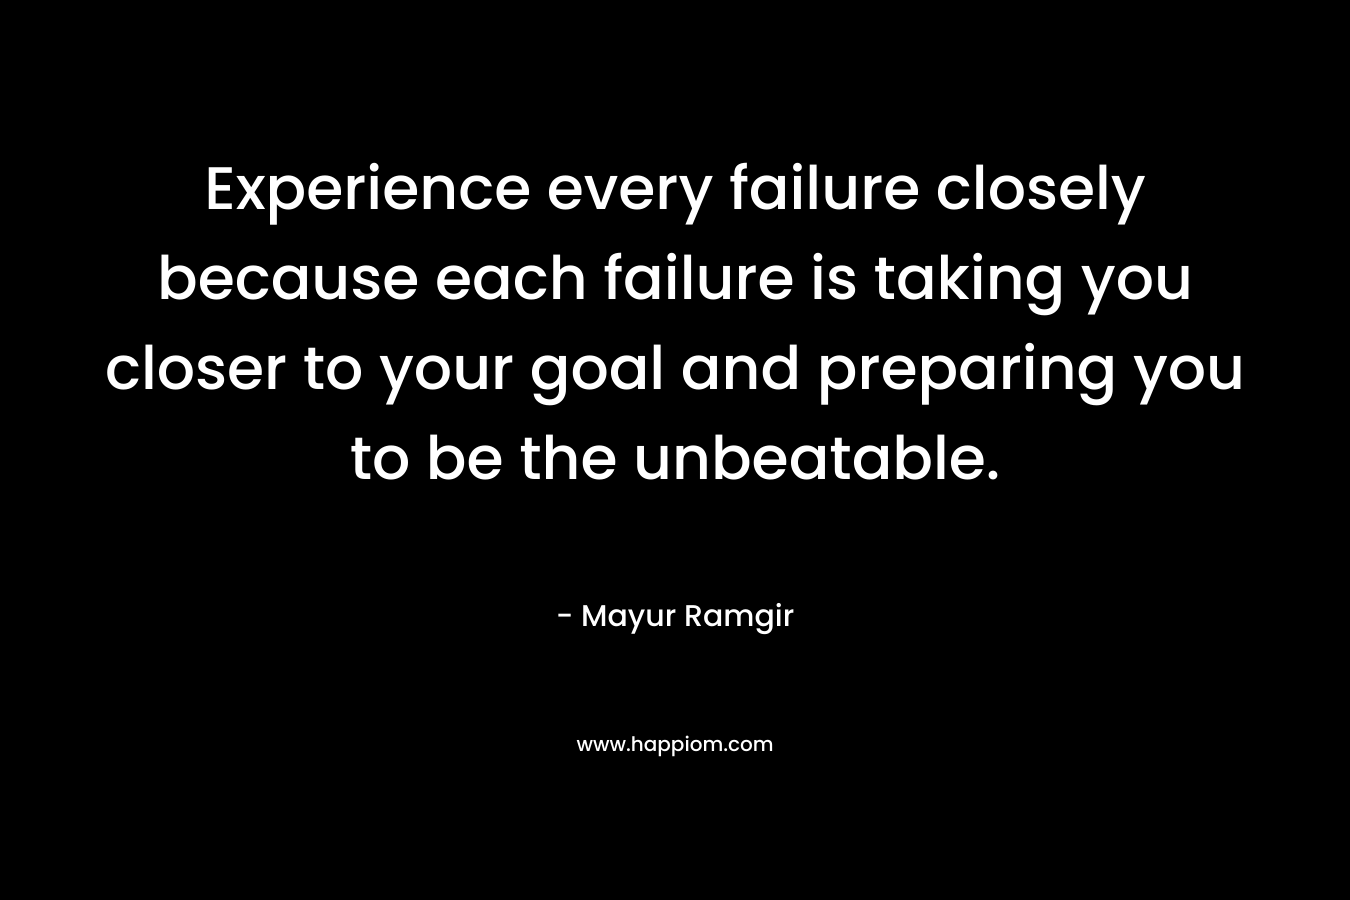 Experience every failure closely because each failure is taking you closer to your goal and preparing you to be the unbeatable.